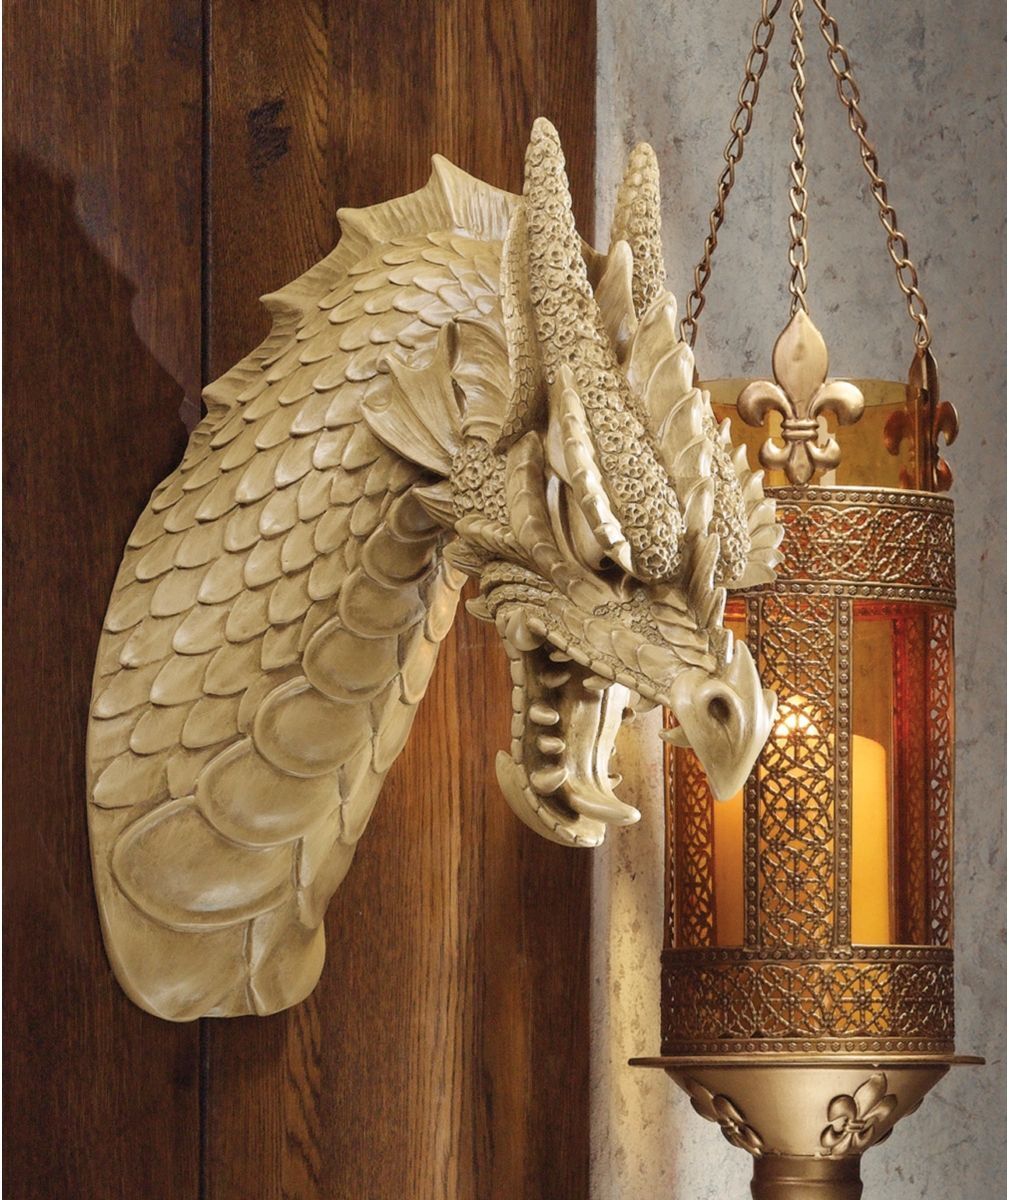 Medieval Beast Gothic Knight\'s Trophy Wall Mounted Horned Dragon Sculpture